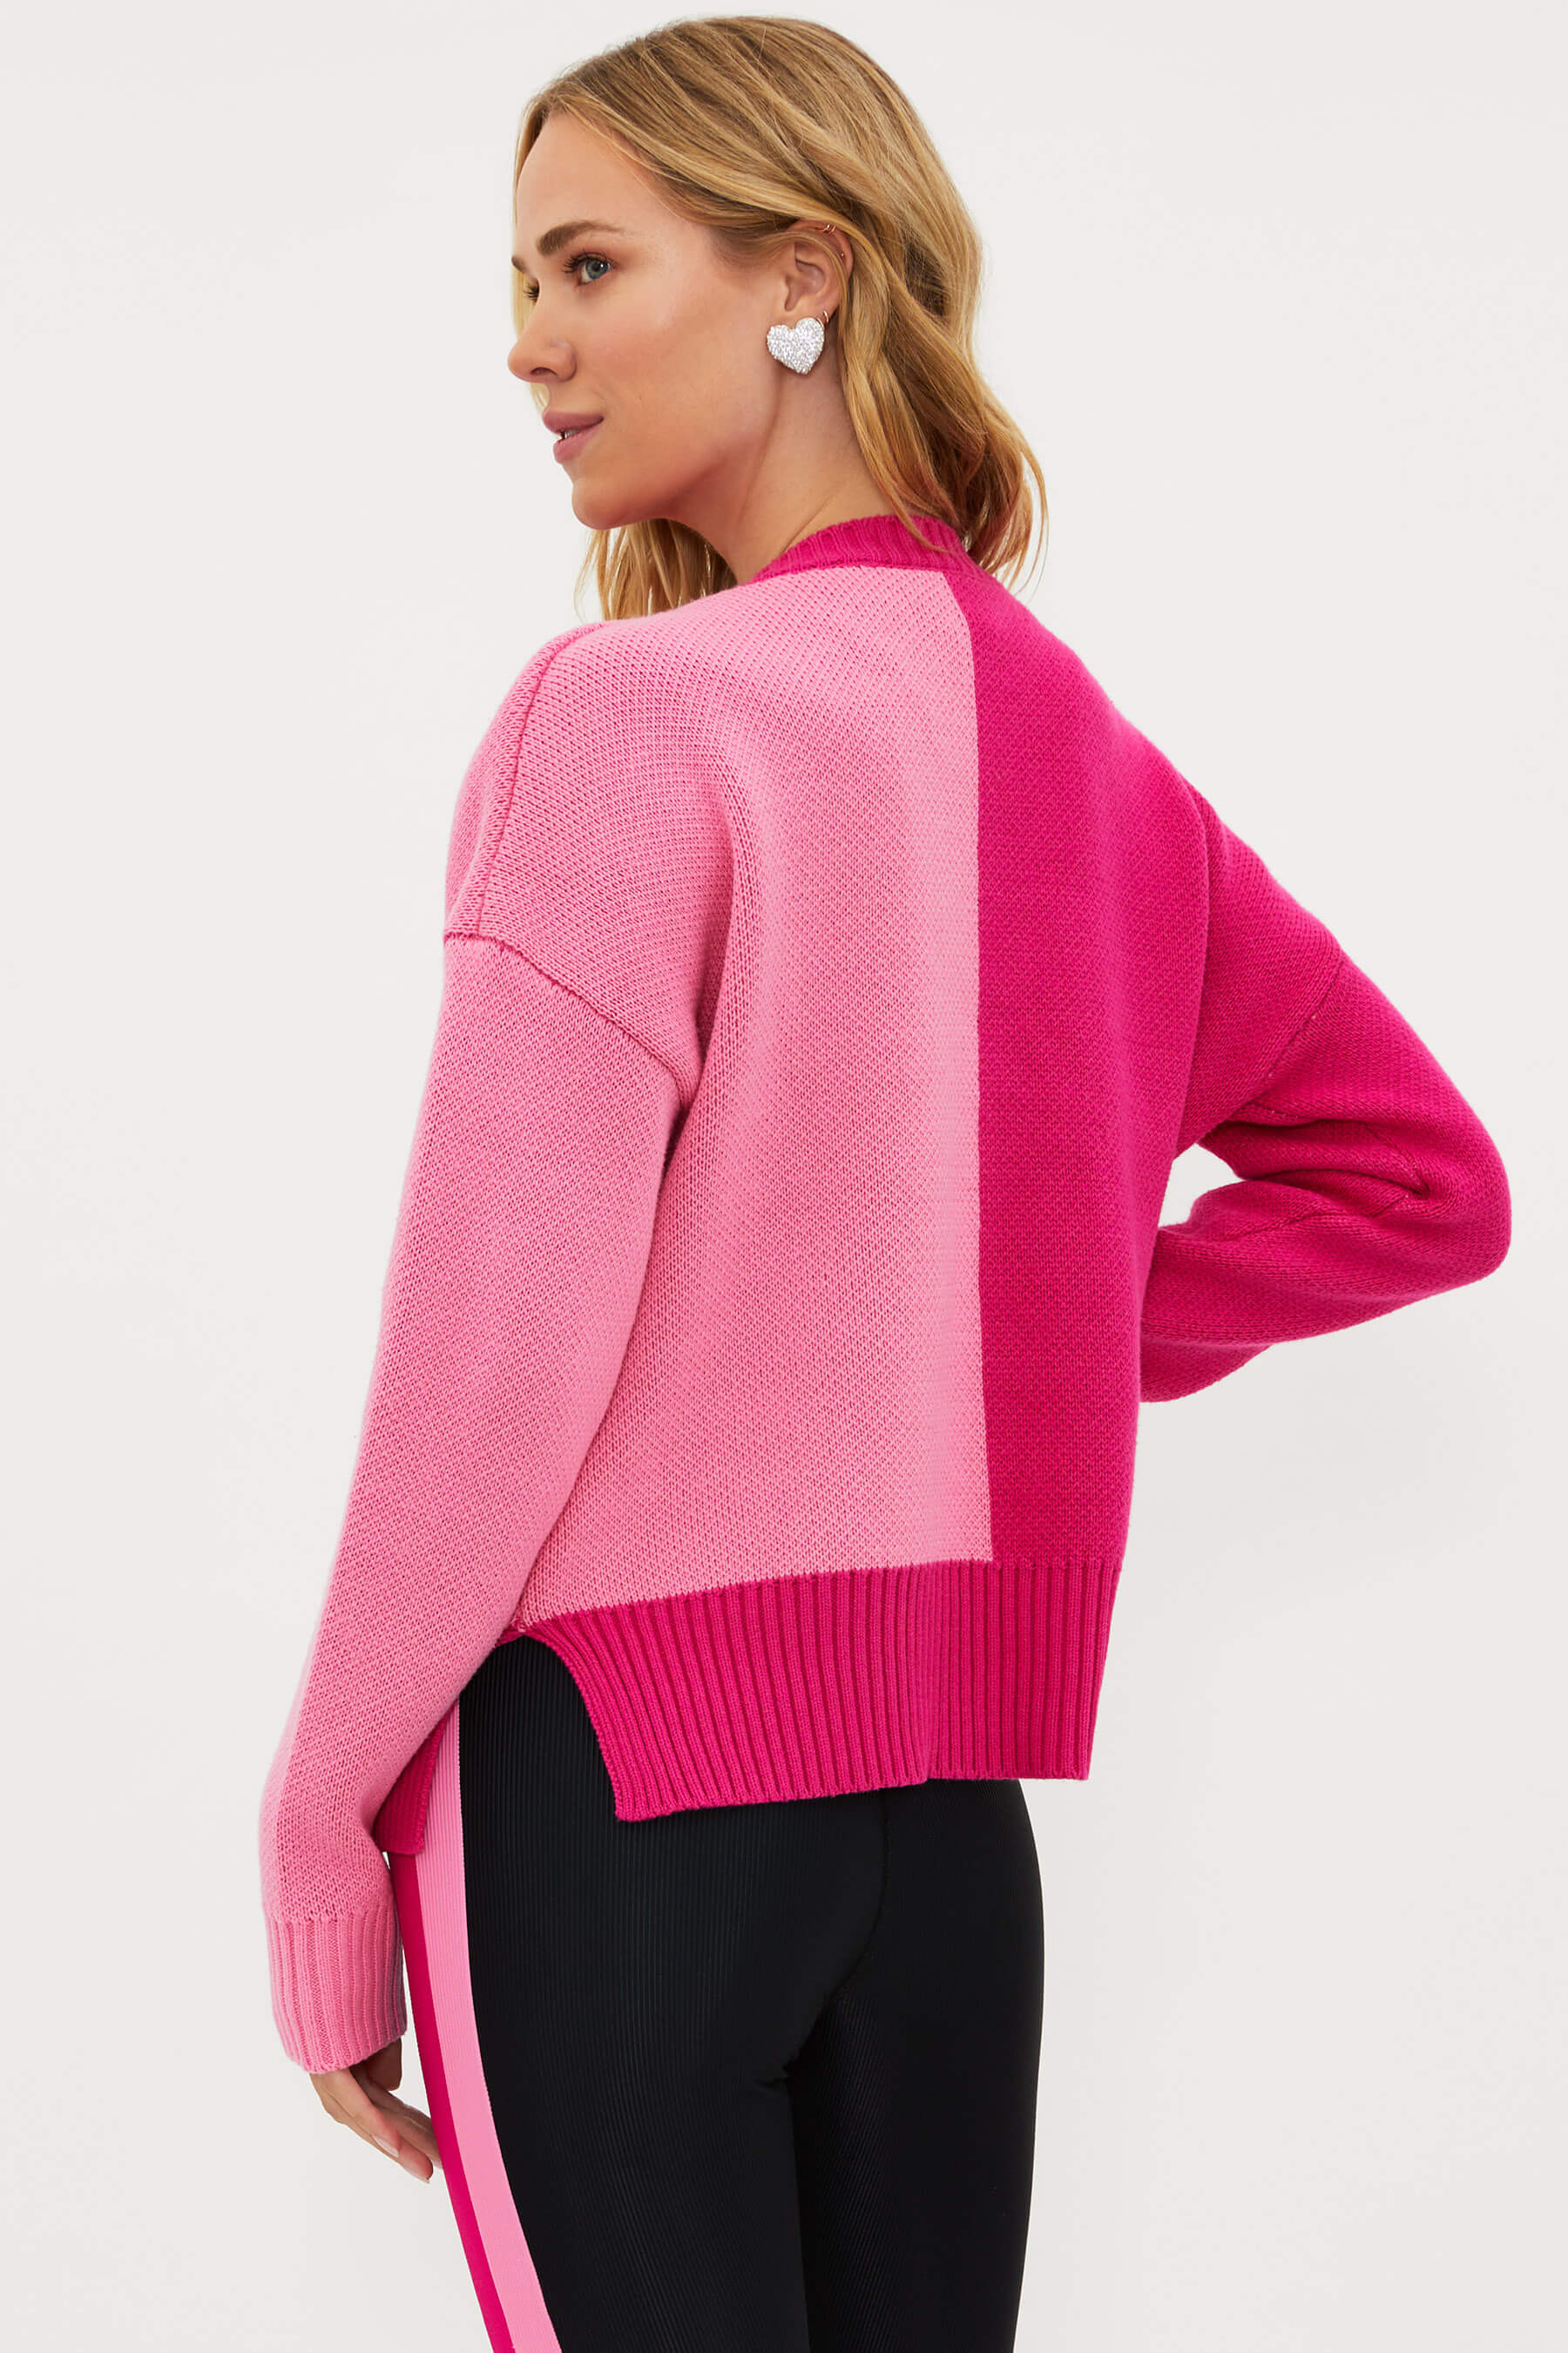 Pink heart two toned sweater